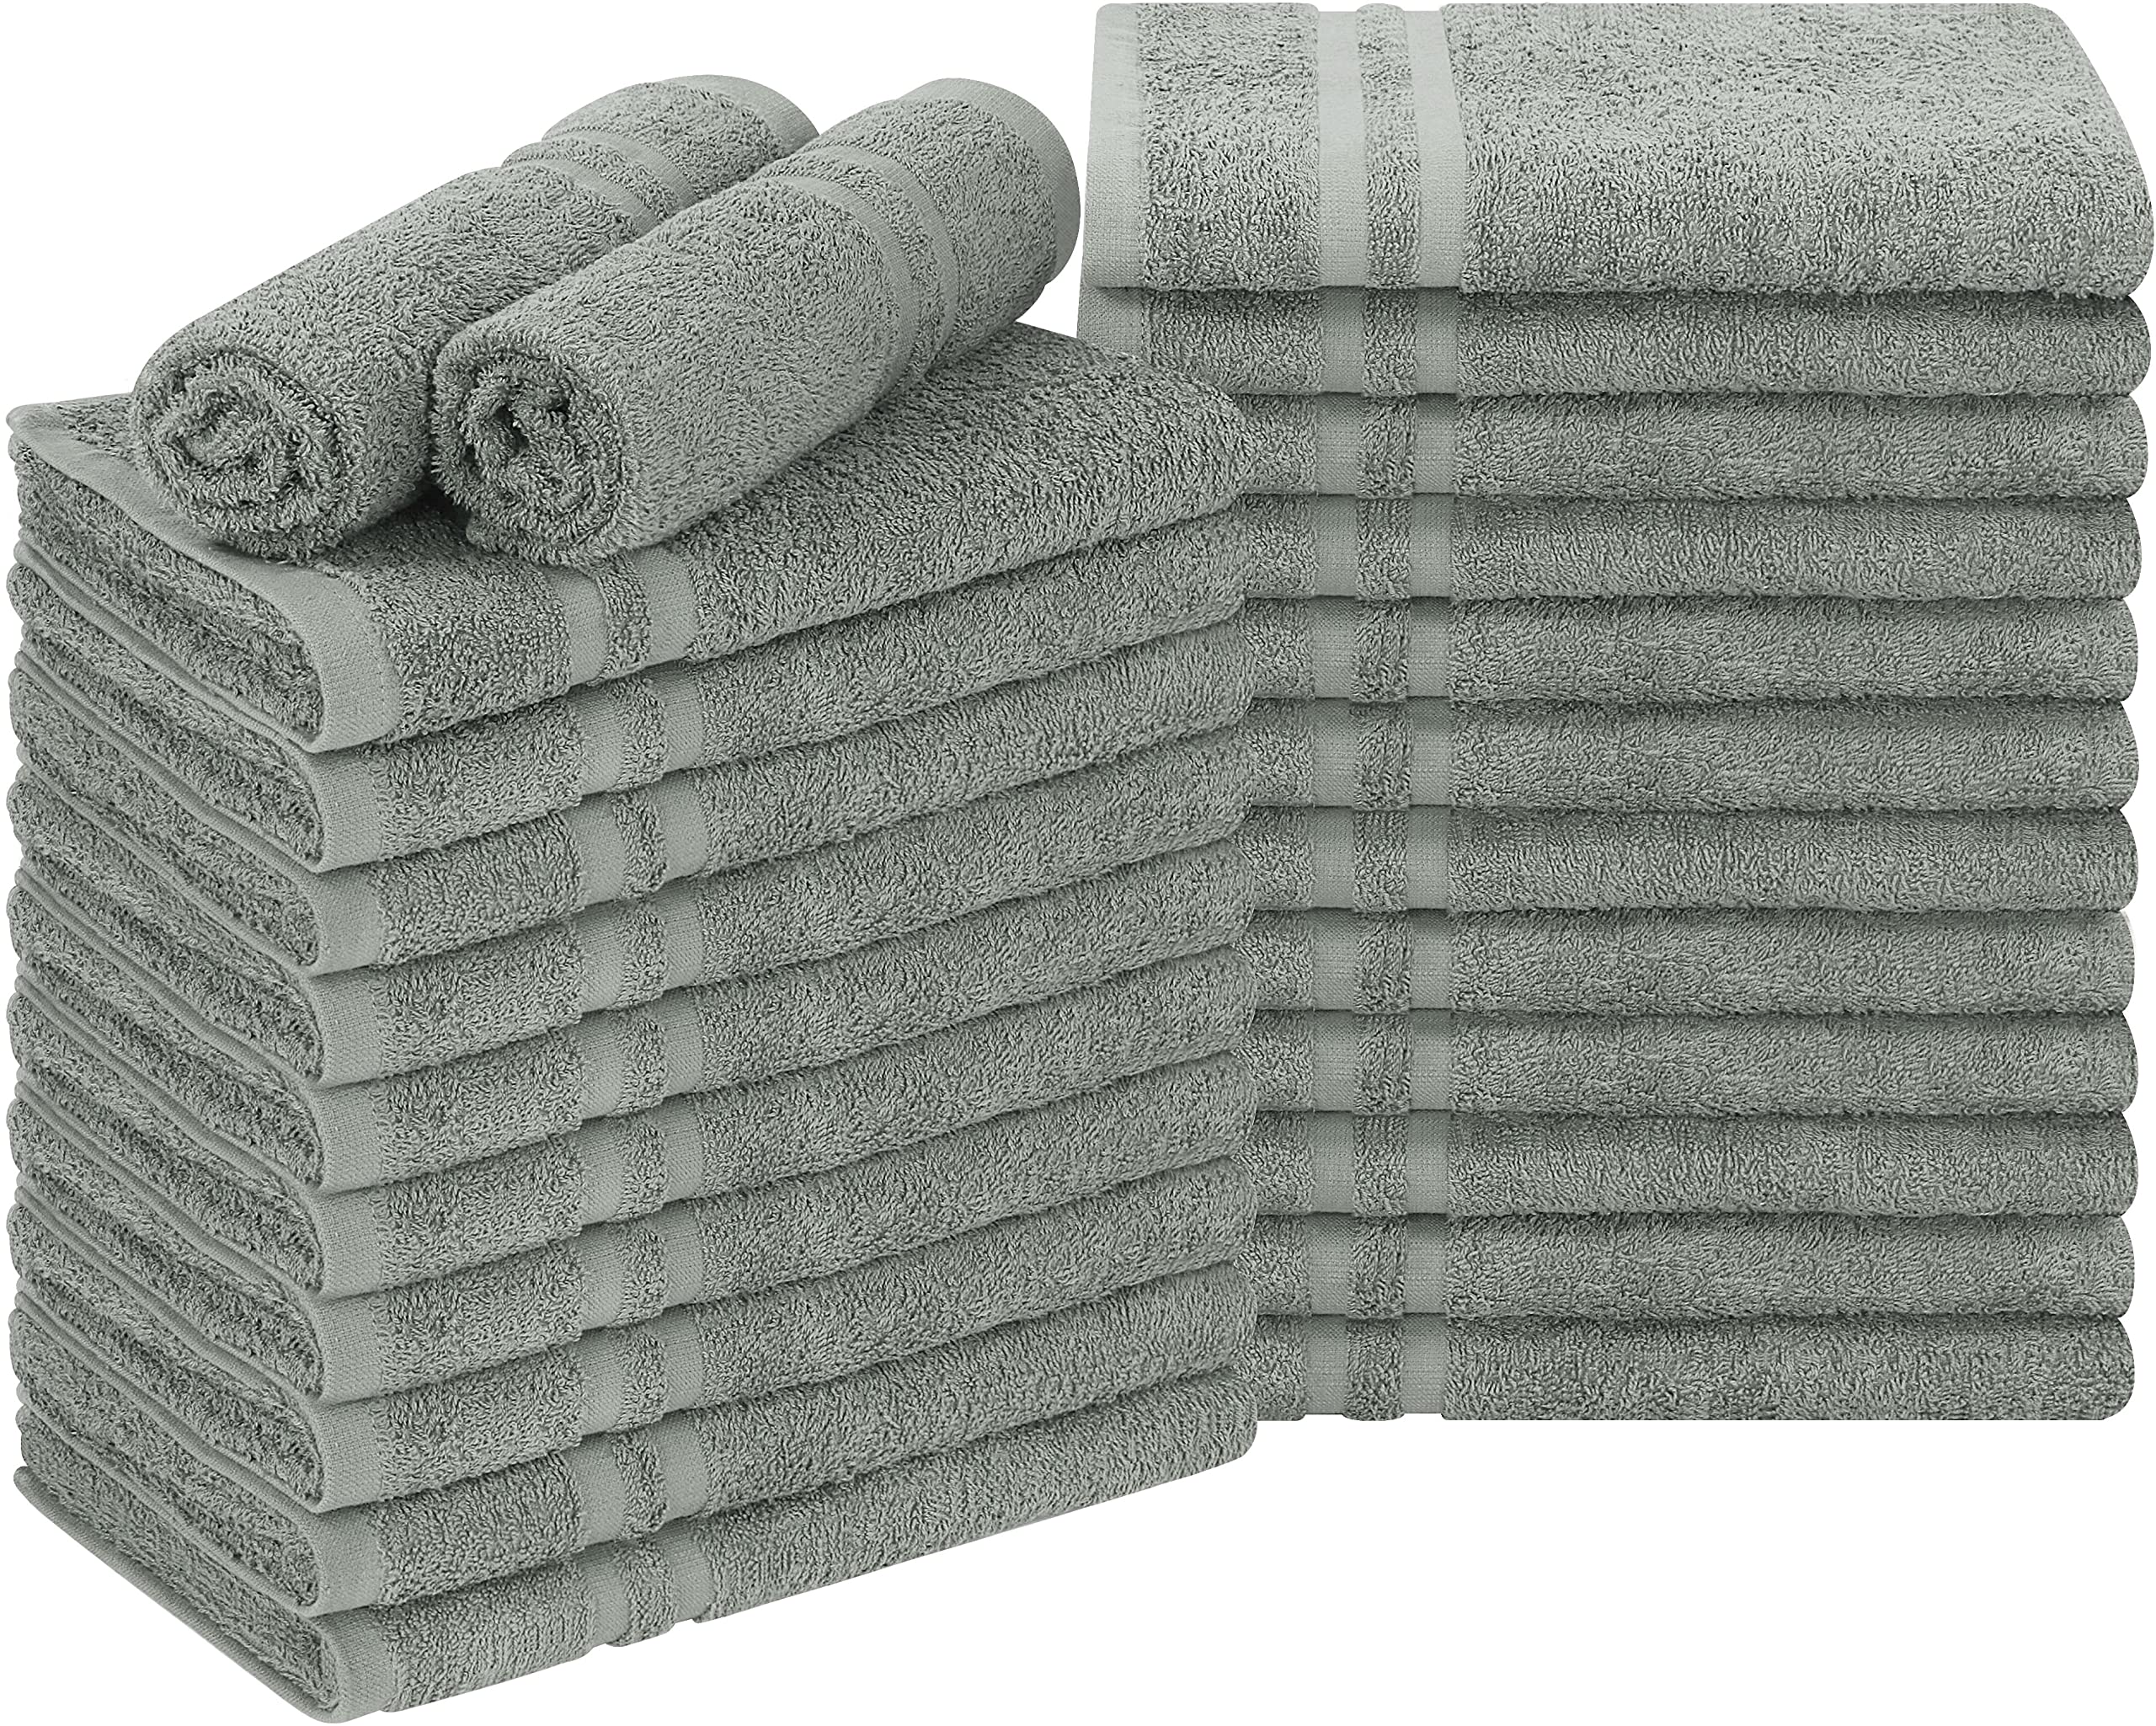 Utopia Towels Cotton Bleach Proof Salon Towels (16x27 inches) - Bleach Safe  Gym Hand Towel (24 Pack